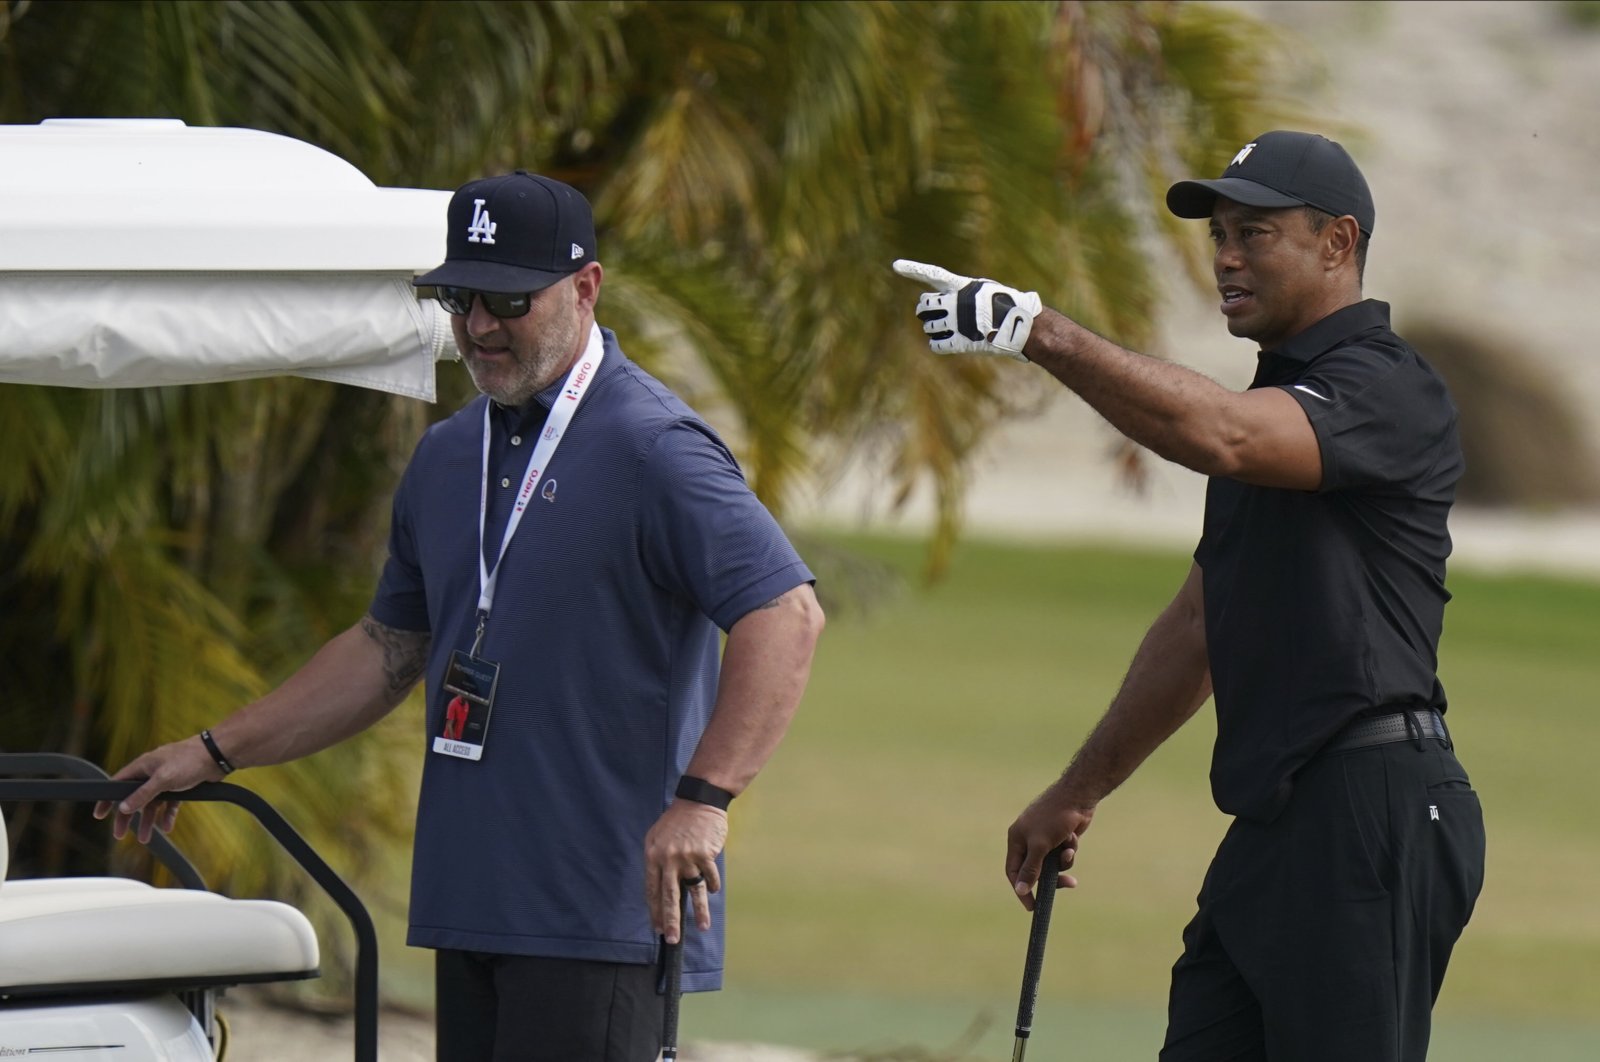 Tiger Woods (R) speaks with his trainer Kolby Wayne during a practice session at the Albany Golf Club in the Bahamas, Dec. 4, 2021. (AP Photo)